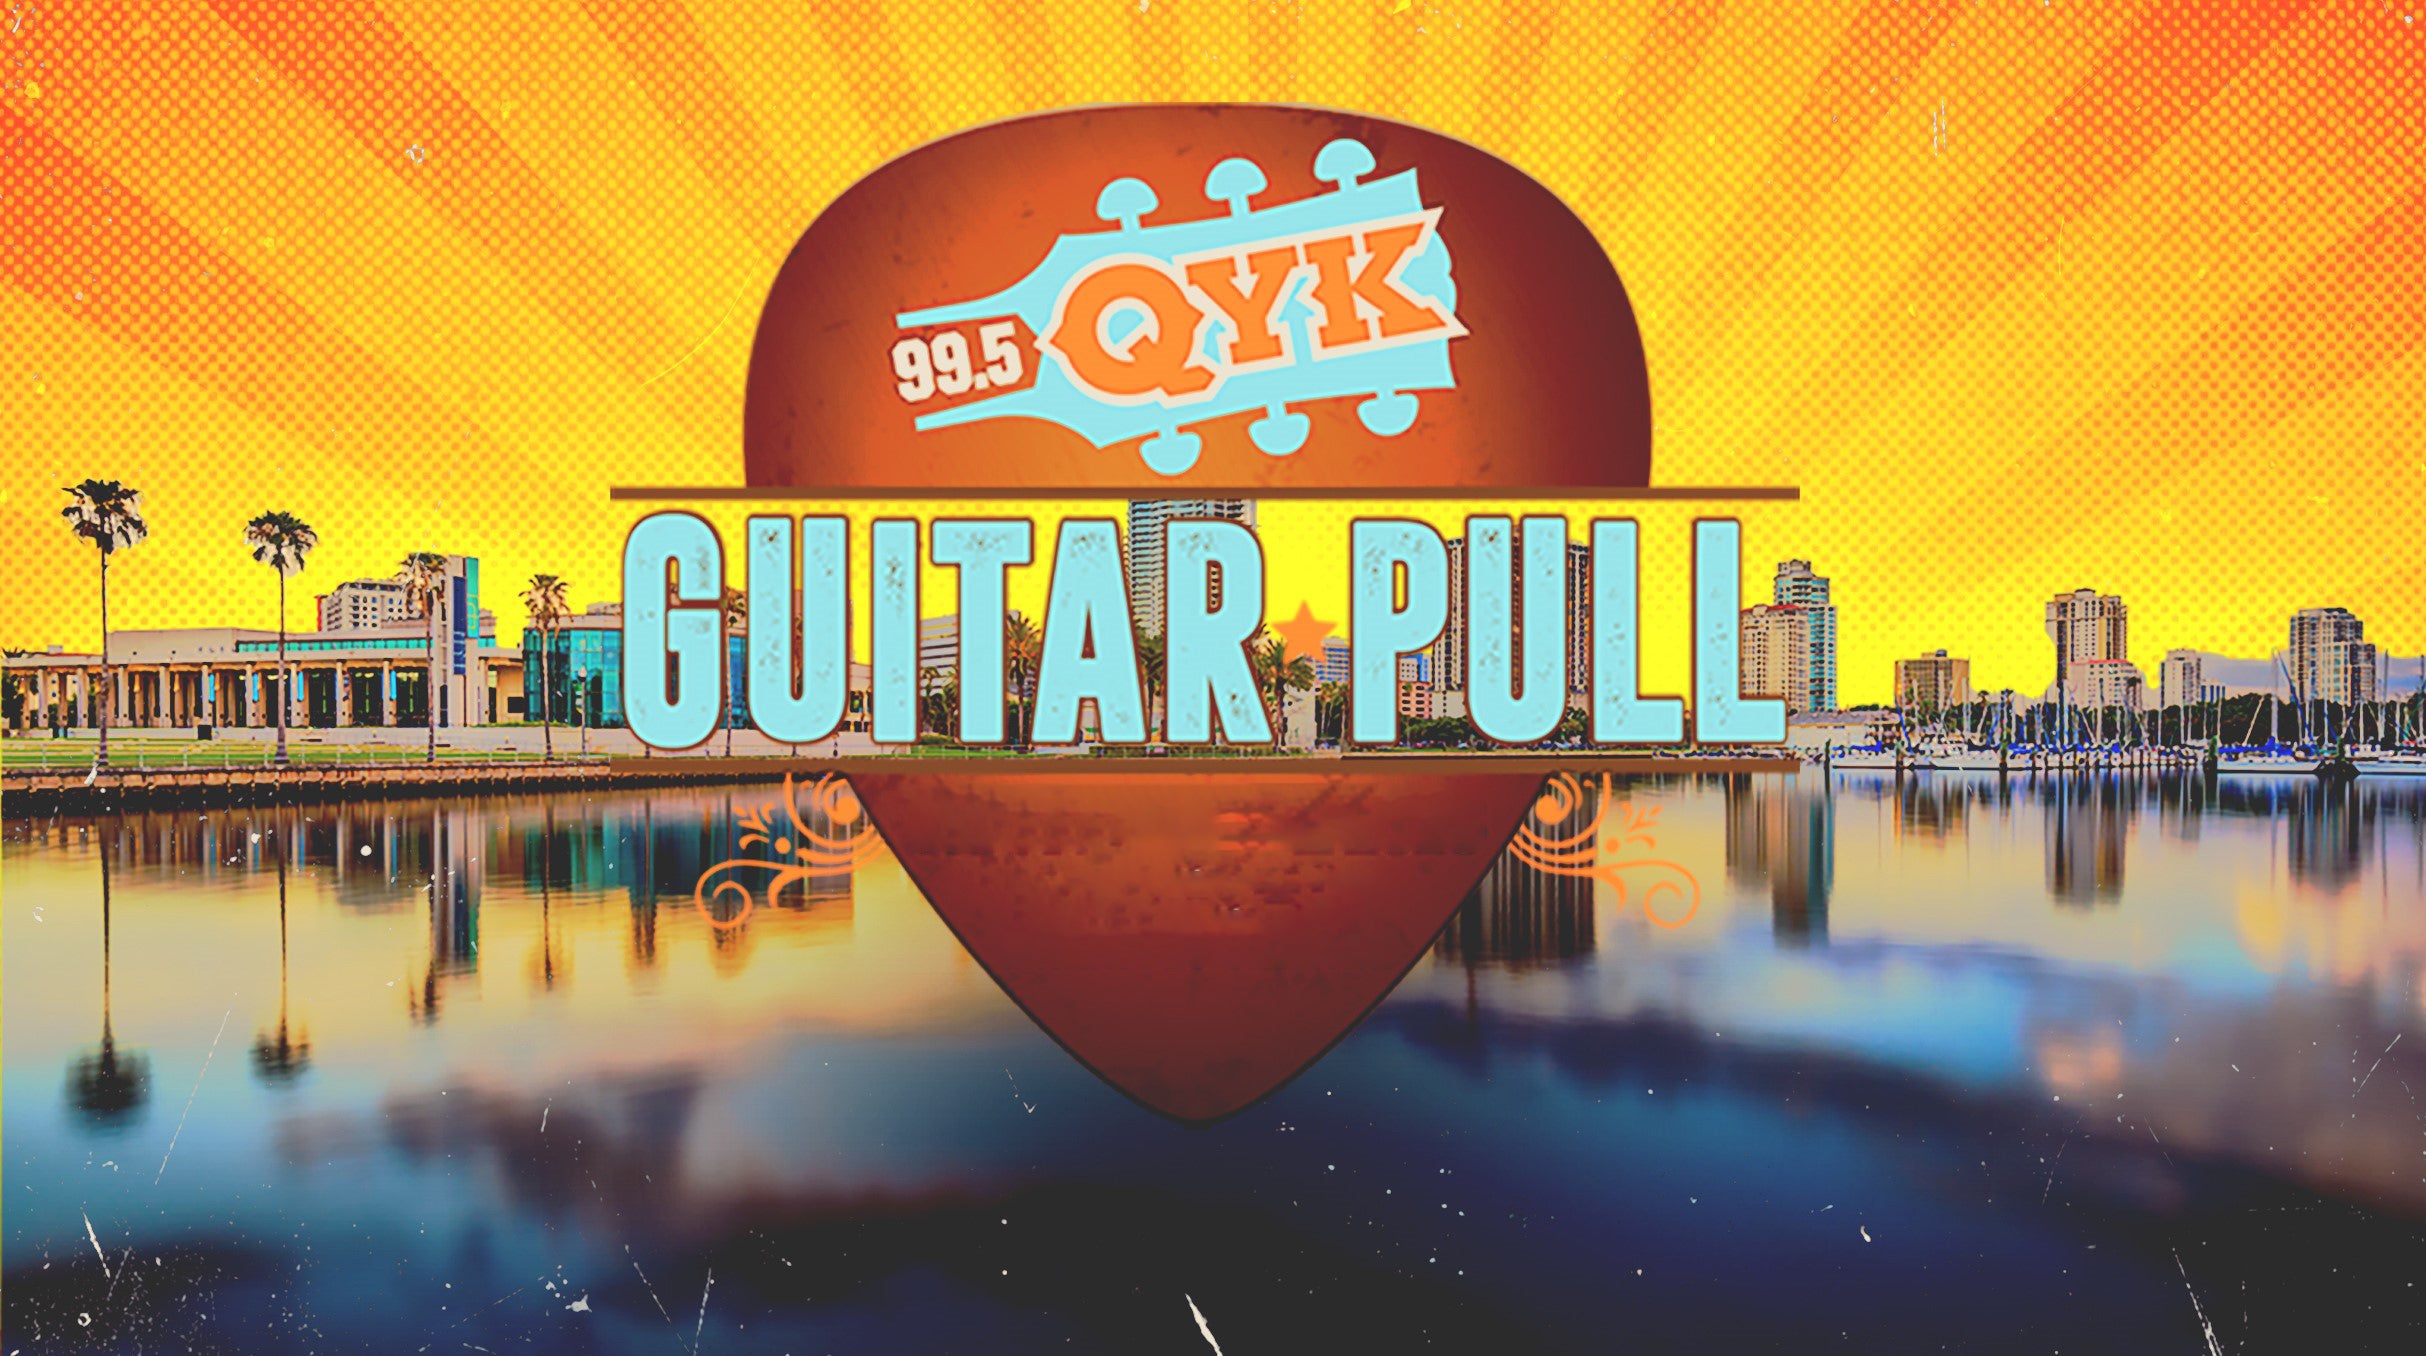 99.5 QYK Guitar Pull in St Petersburg promo photo for Official Platinum Onsale presale offer code